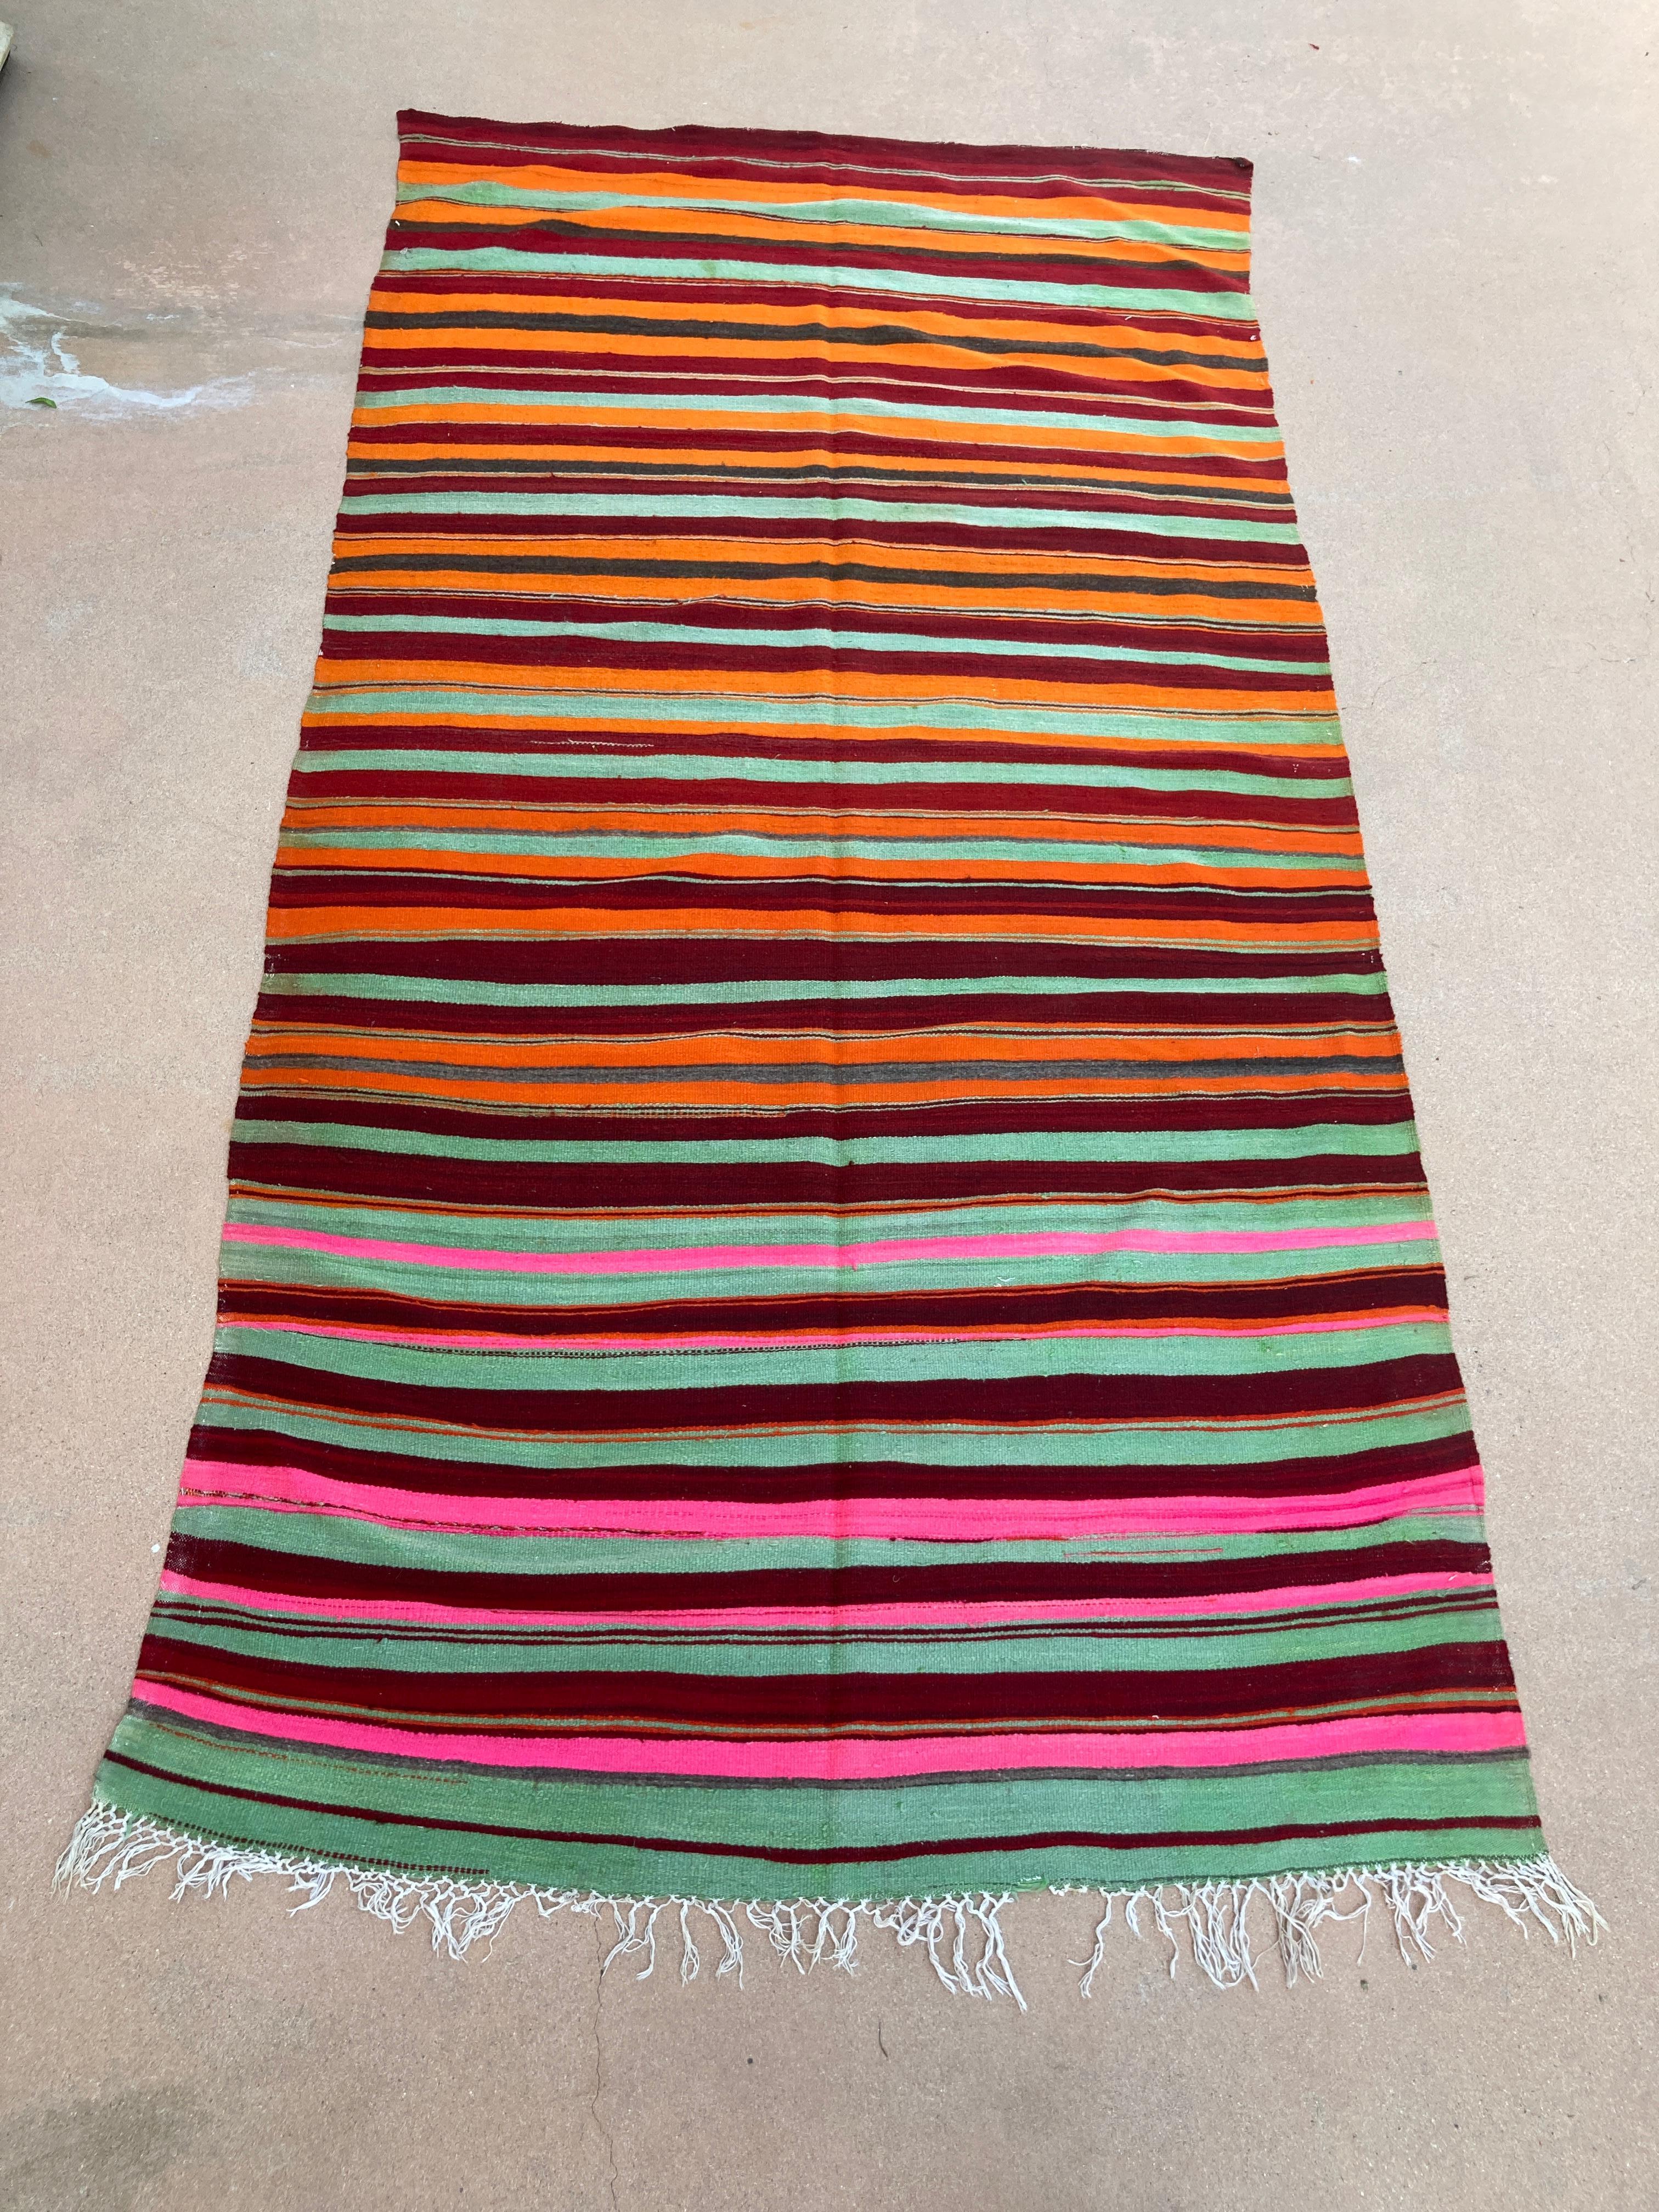 Vintage Moroccan flat-weave Kilim rug, North Africa.
Large size vintage Moroccan rug, handwoven by Berber women in Morocco for their own use.
This rug was made using flat-weave technique with linear pattern of alternating stripes in different